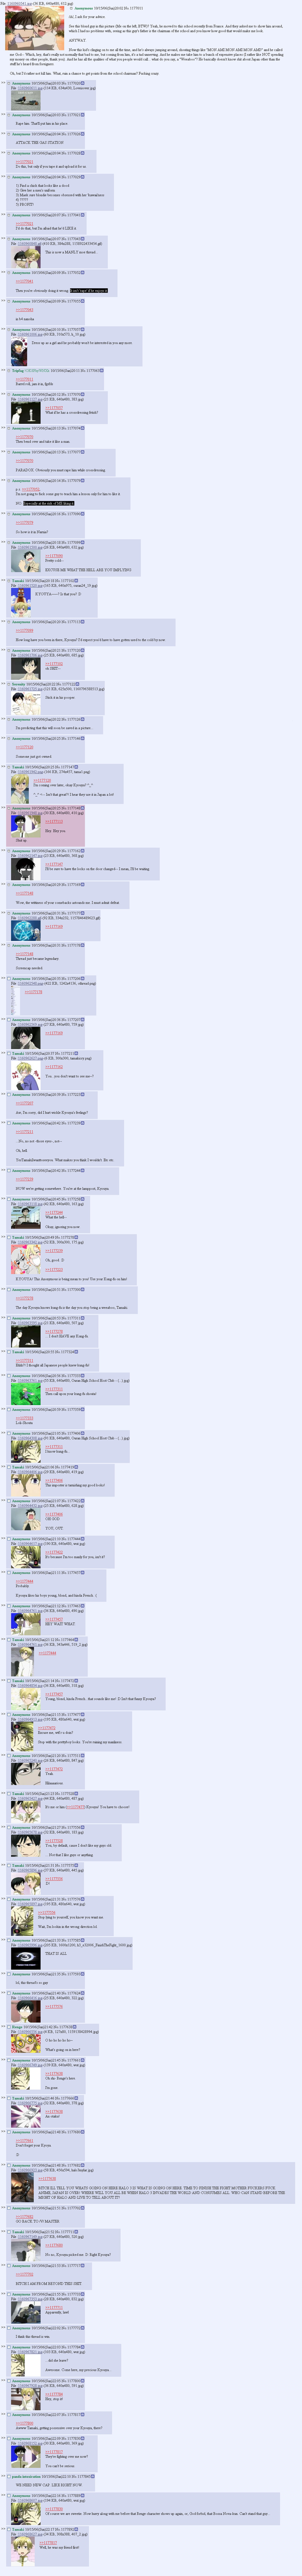 4boys 4chan absurdres highres incredibly_absurdres long_image multiple_boys multiple_girls ouran_high_school_host_club screencap tall_image